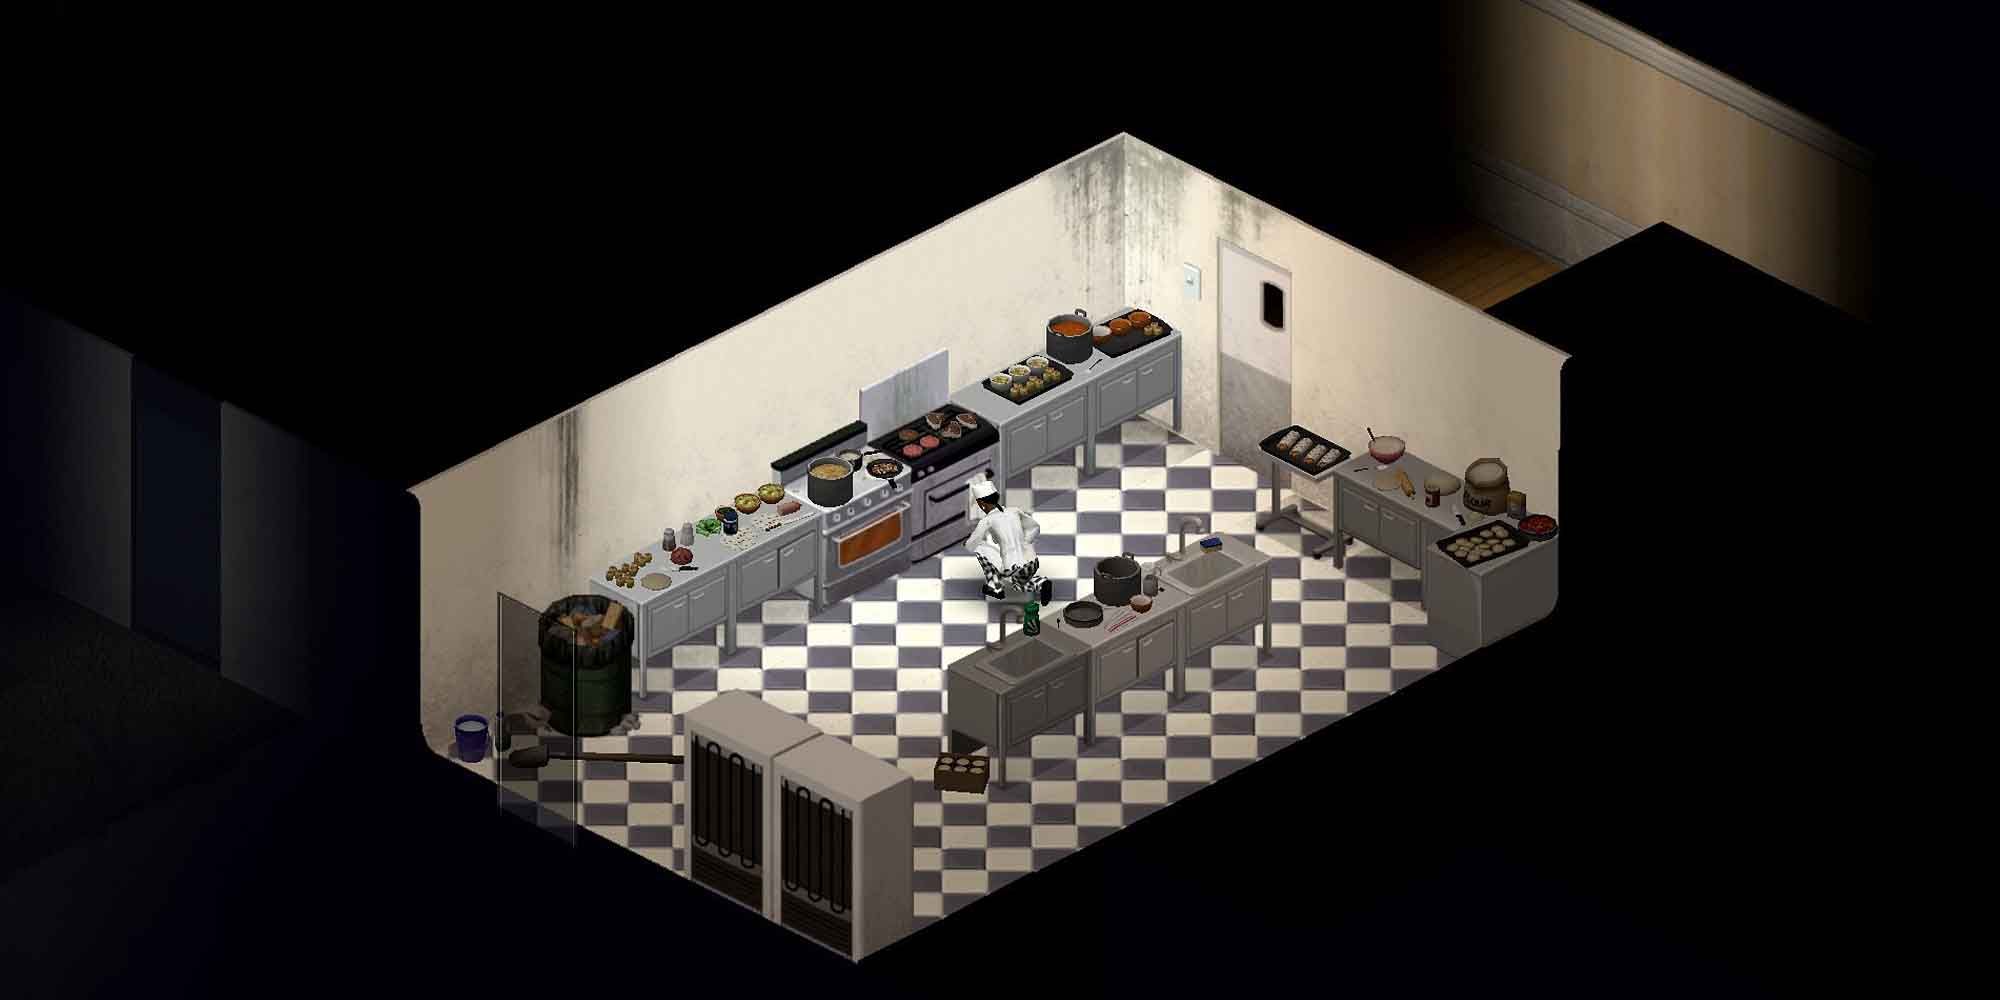 Cooking a meal in Project Zomboid